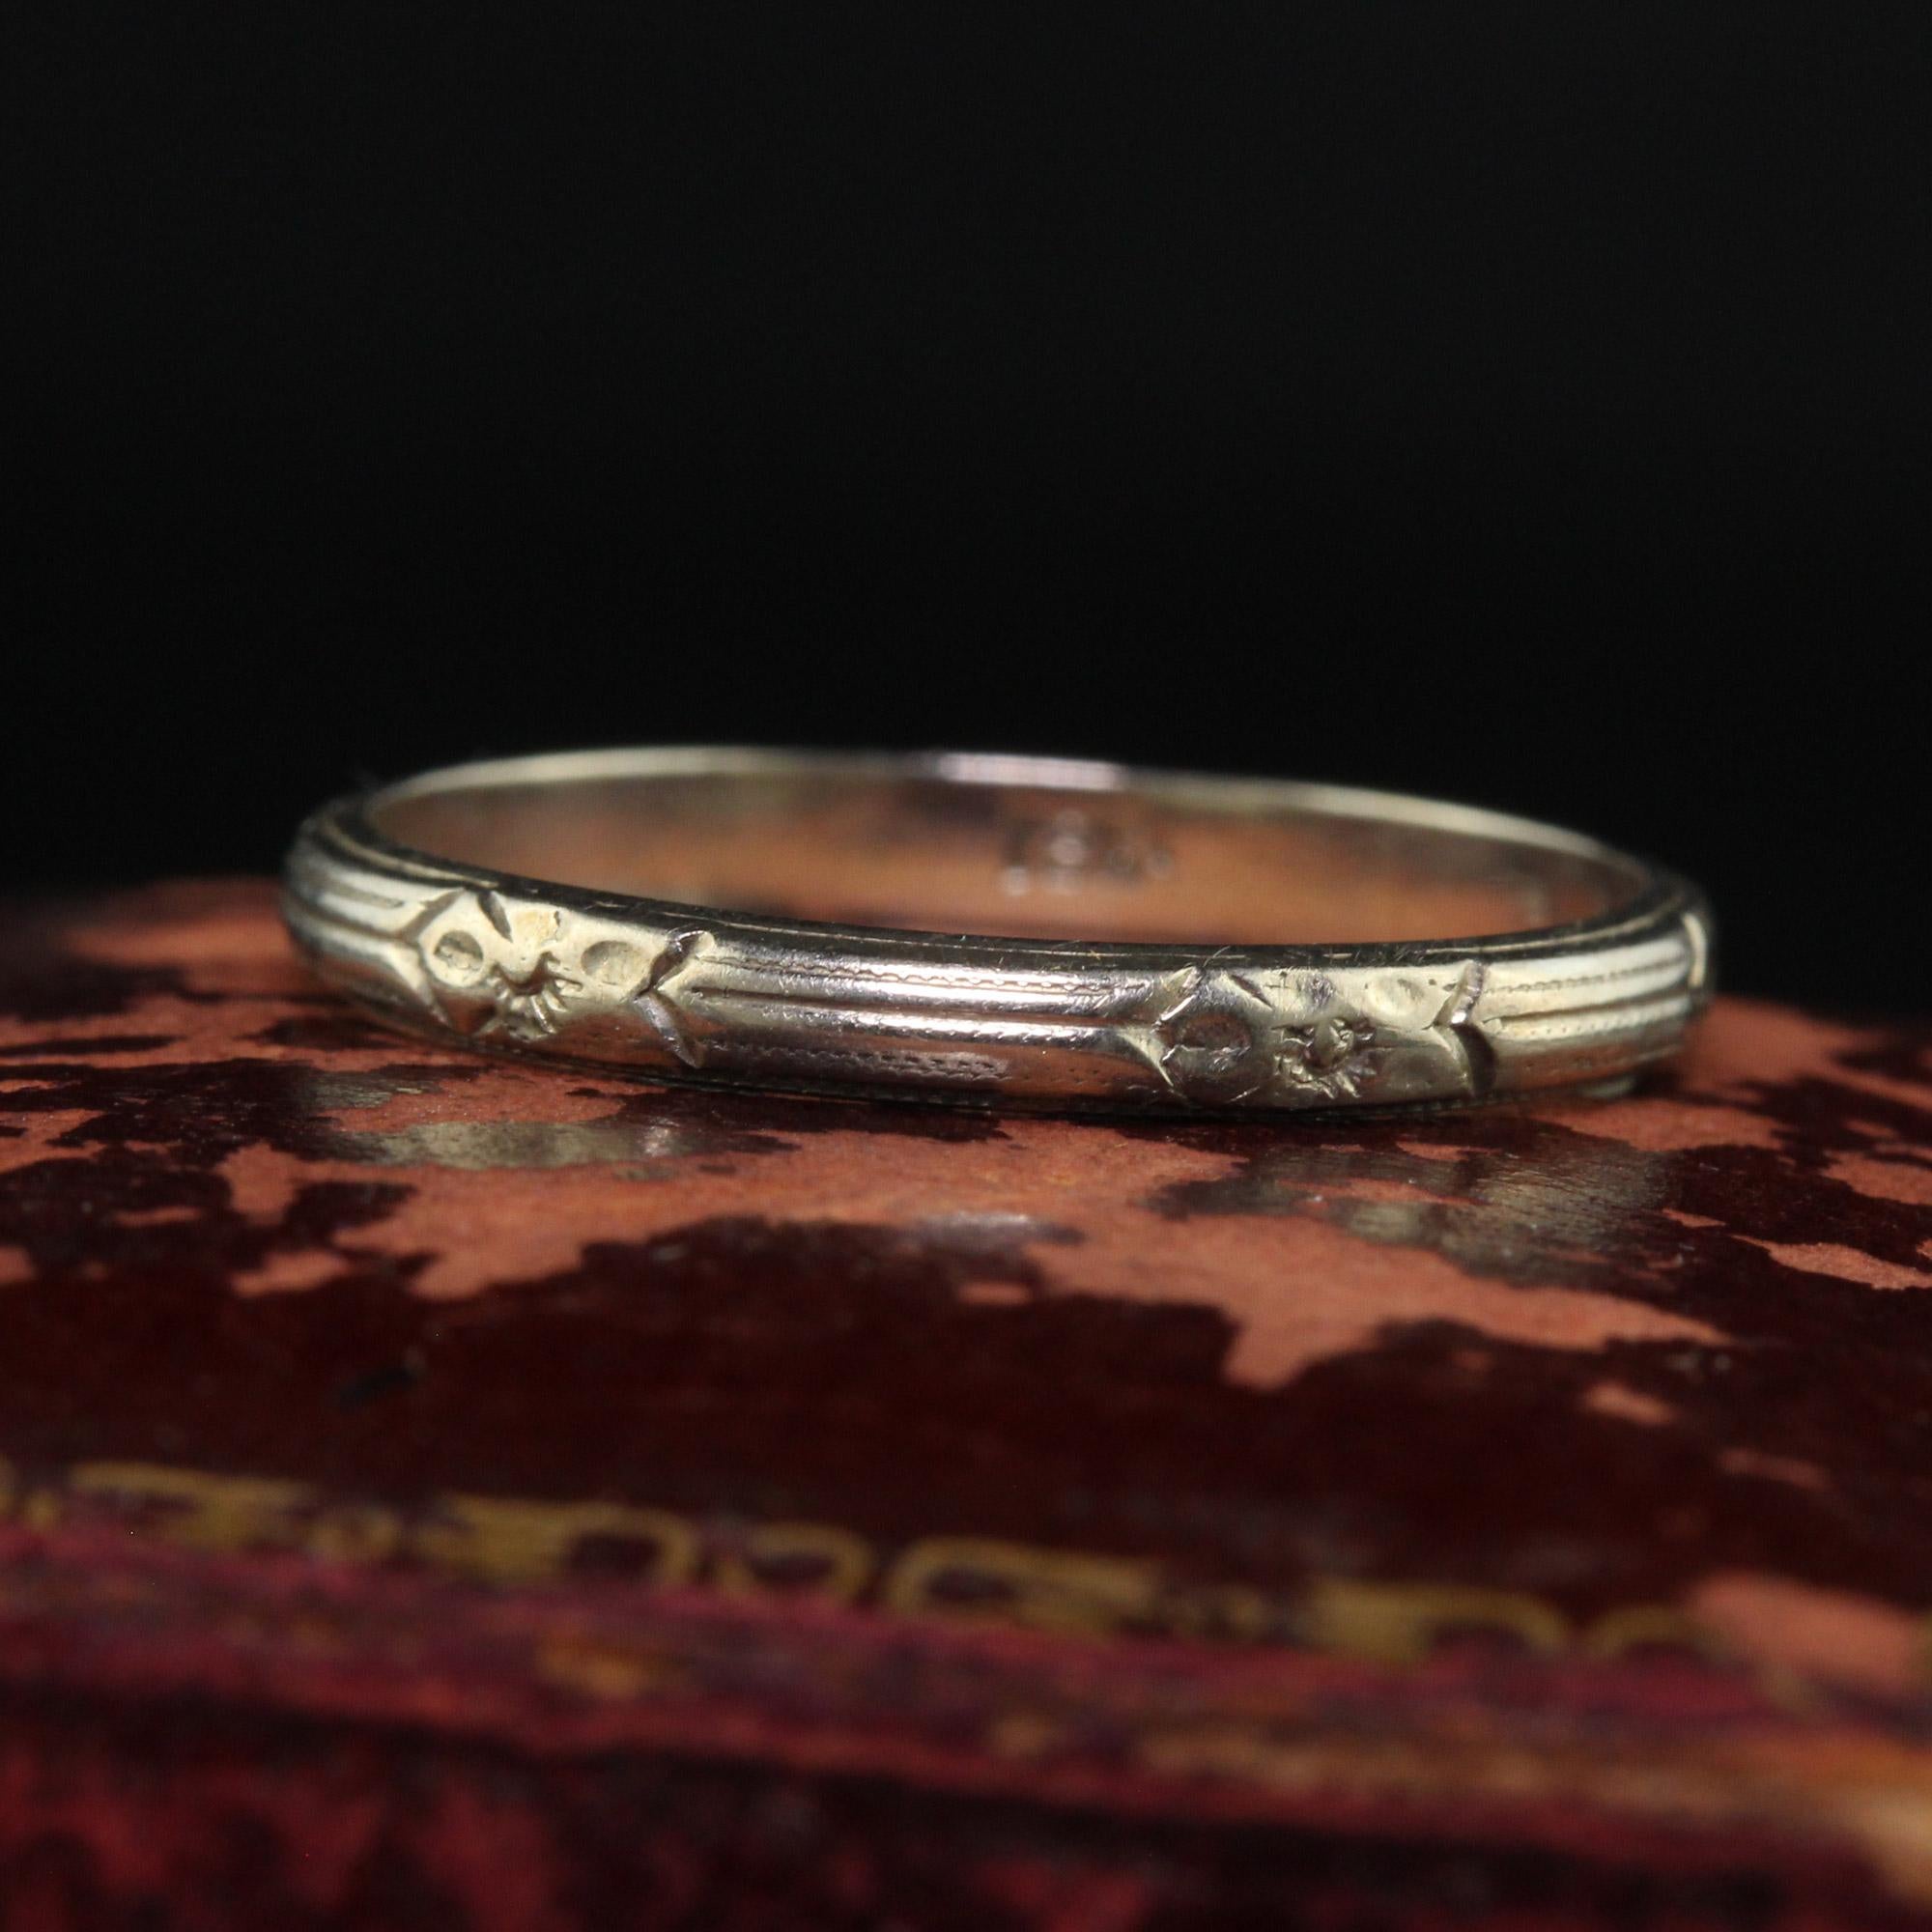 Beautiful Antique Art Deco 18K White Gold Engraved Wedding Band - Size 5 1/2. This incredible wedding band is crafted in 18k white gold. This beautiful band has engravings going around the entire ring and sits low on the finger. The ring is in great